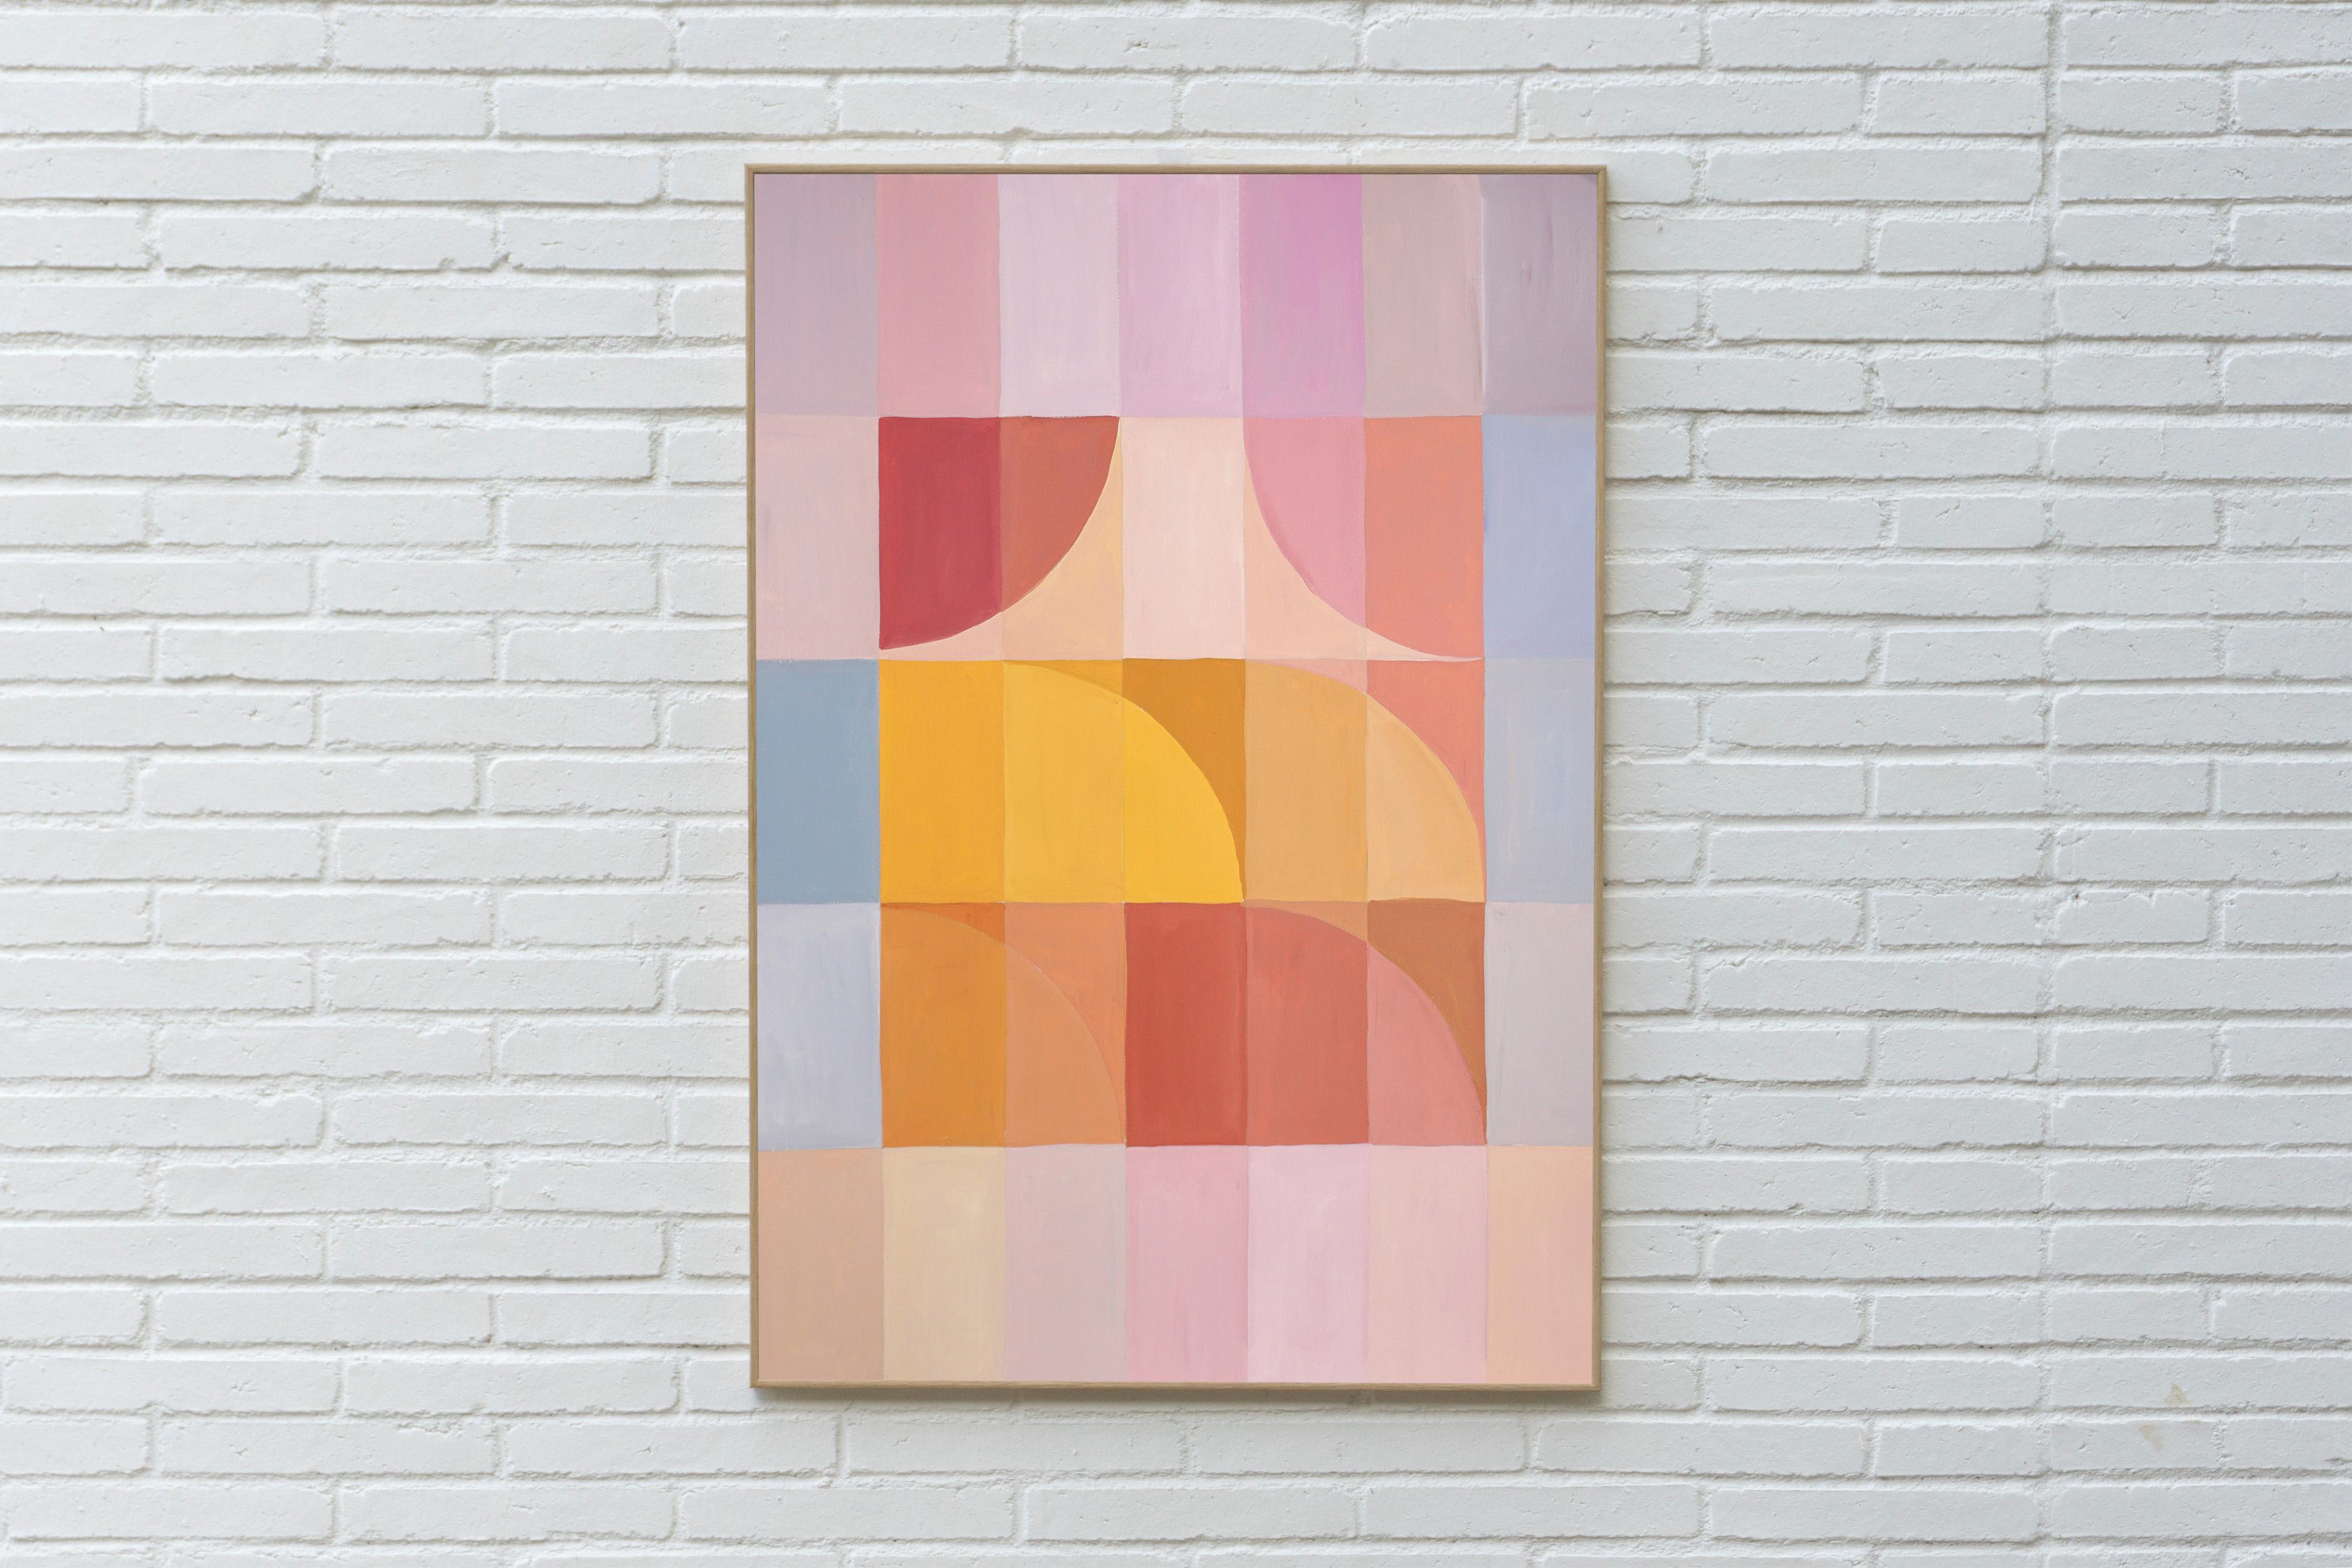 Abstract Body Through Window, Bauhaus Pattern Grid, Sandy Tones, Pale Pink   - Painting by Natalia Roman